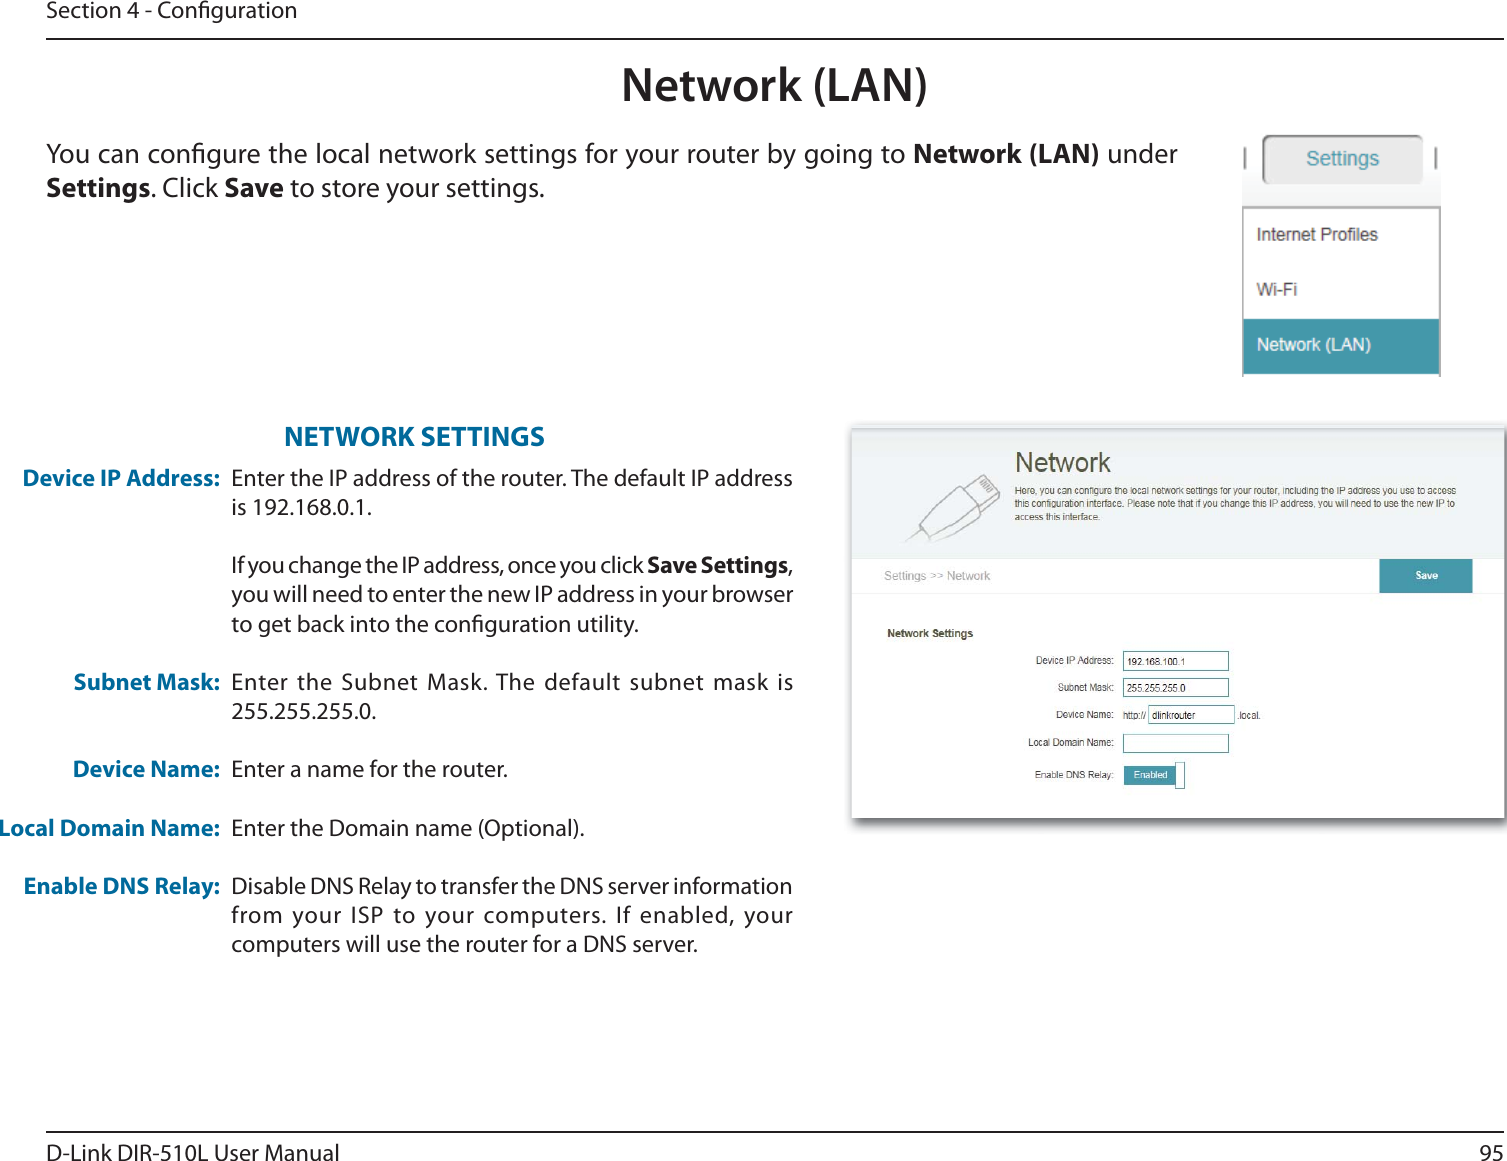 95D-Link DIR-510L User ManualSection 4 - CongurationNetwork (LAN)You can congure the local network settings for your router by going to Network (LAN) under Settings. Click Save to store your settings.Device IP Address:Subnet Mask:Device Name:Local Domain Name:Enable DNS Relay:Enter the IP address of the router. The default IP address is 192.168.0.1.If you change the IP address, once you click Save Settings, you will need to enter the new IP address in your browser to get back into the conguration utility.Enter the Subnet Mask. The default subnet mask is 255.255.255.0.Enter a name for the router.Enter the Domain name (Optional).Disable DNS Relay to transfer the DNS server information from your ISP to your computers. If enabled, your computers will use the router for a DNS server.NETWORK SETTINGS